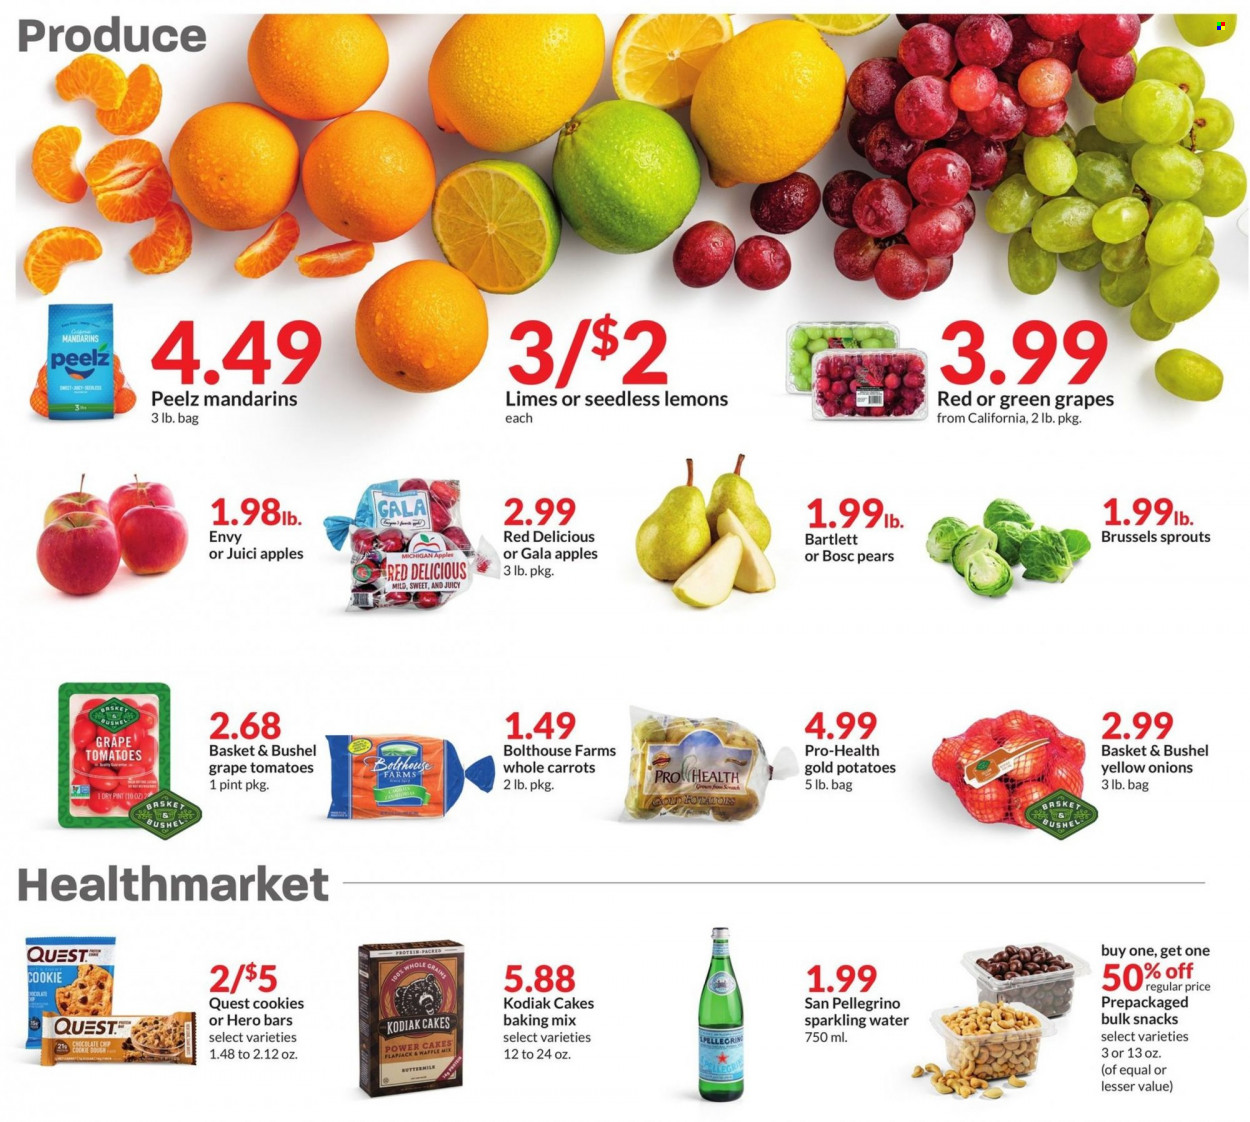 thumbnail - Hy-Vee Flyer - 11/30/2022 - 12/06/2022 - Sales products - cake, carrots, tomatoes, potatoes, onion, brussel sprouts, apples, Gala, mandarines, Red Delicious apples, pears, buttermilk, cookie dough, cookies, snack, baking mix, sparkling water, San Pellegrino, basket, lemons. Page 2.